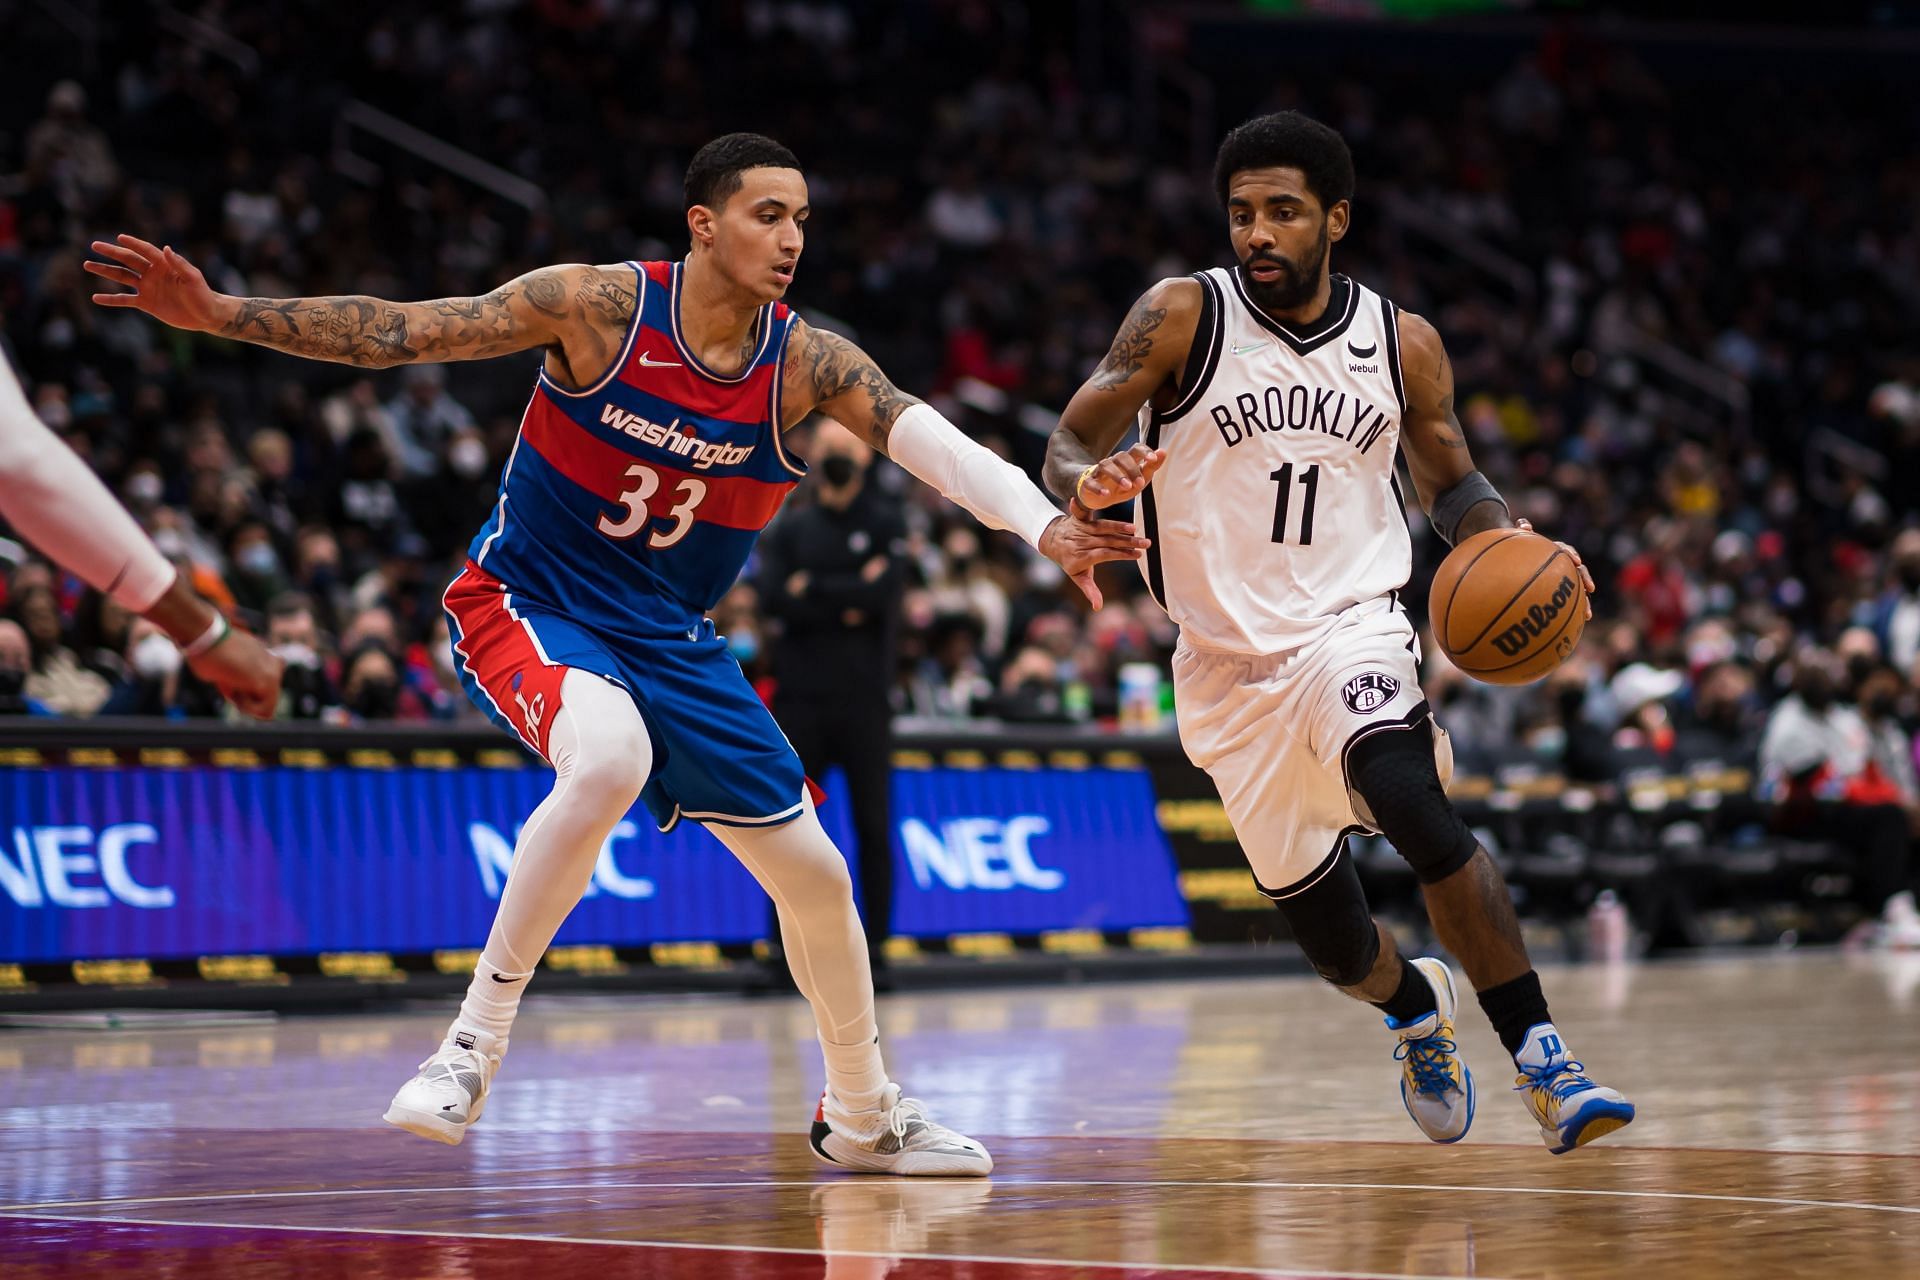 Kyrie Irving of the Brooklyn Nets goes to the basket against Kyle Kuzma of the Washington Wizards during the second half Wednesday in Washington, DC.